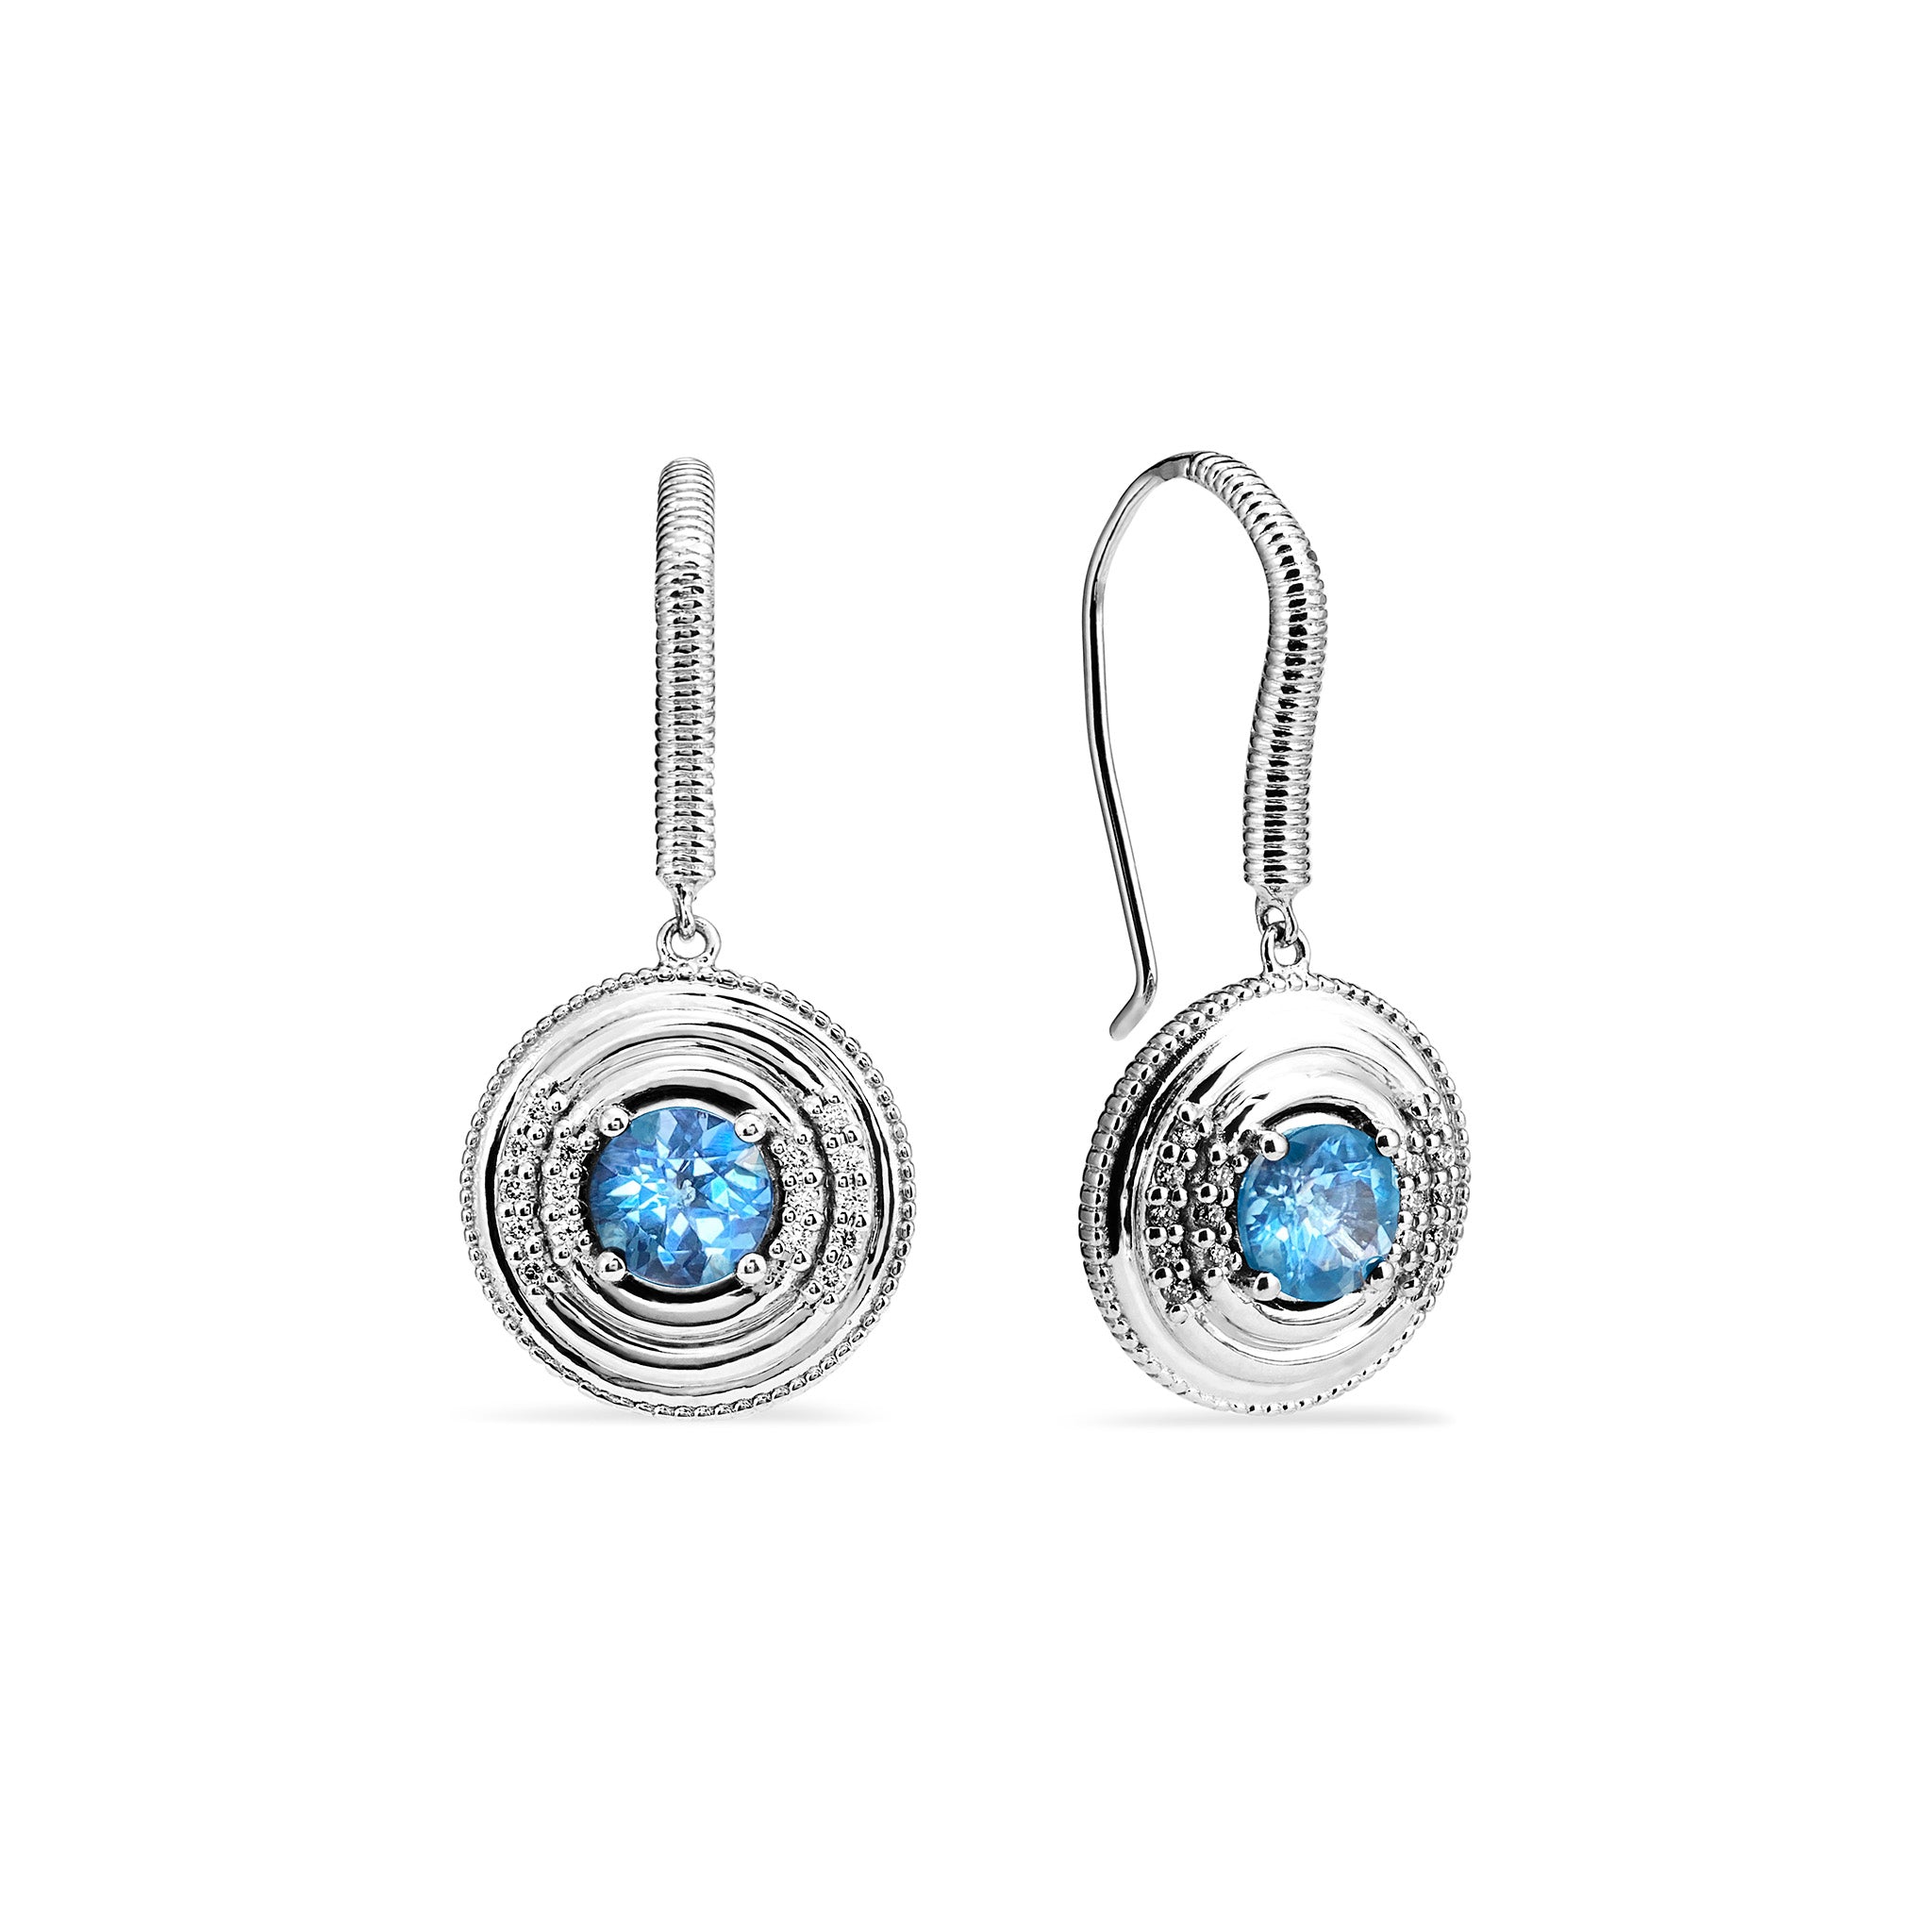 Max Drop Earrings With Swiss Blue Topaz And Diamonds